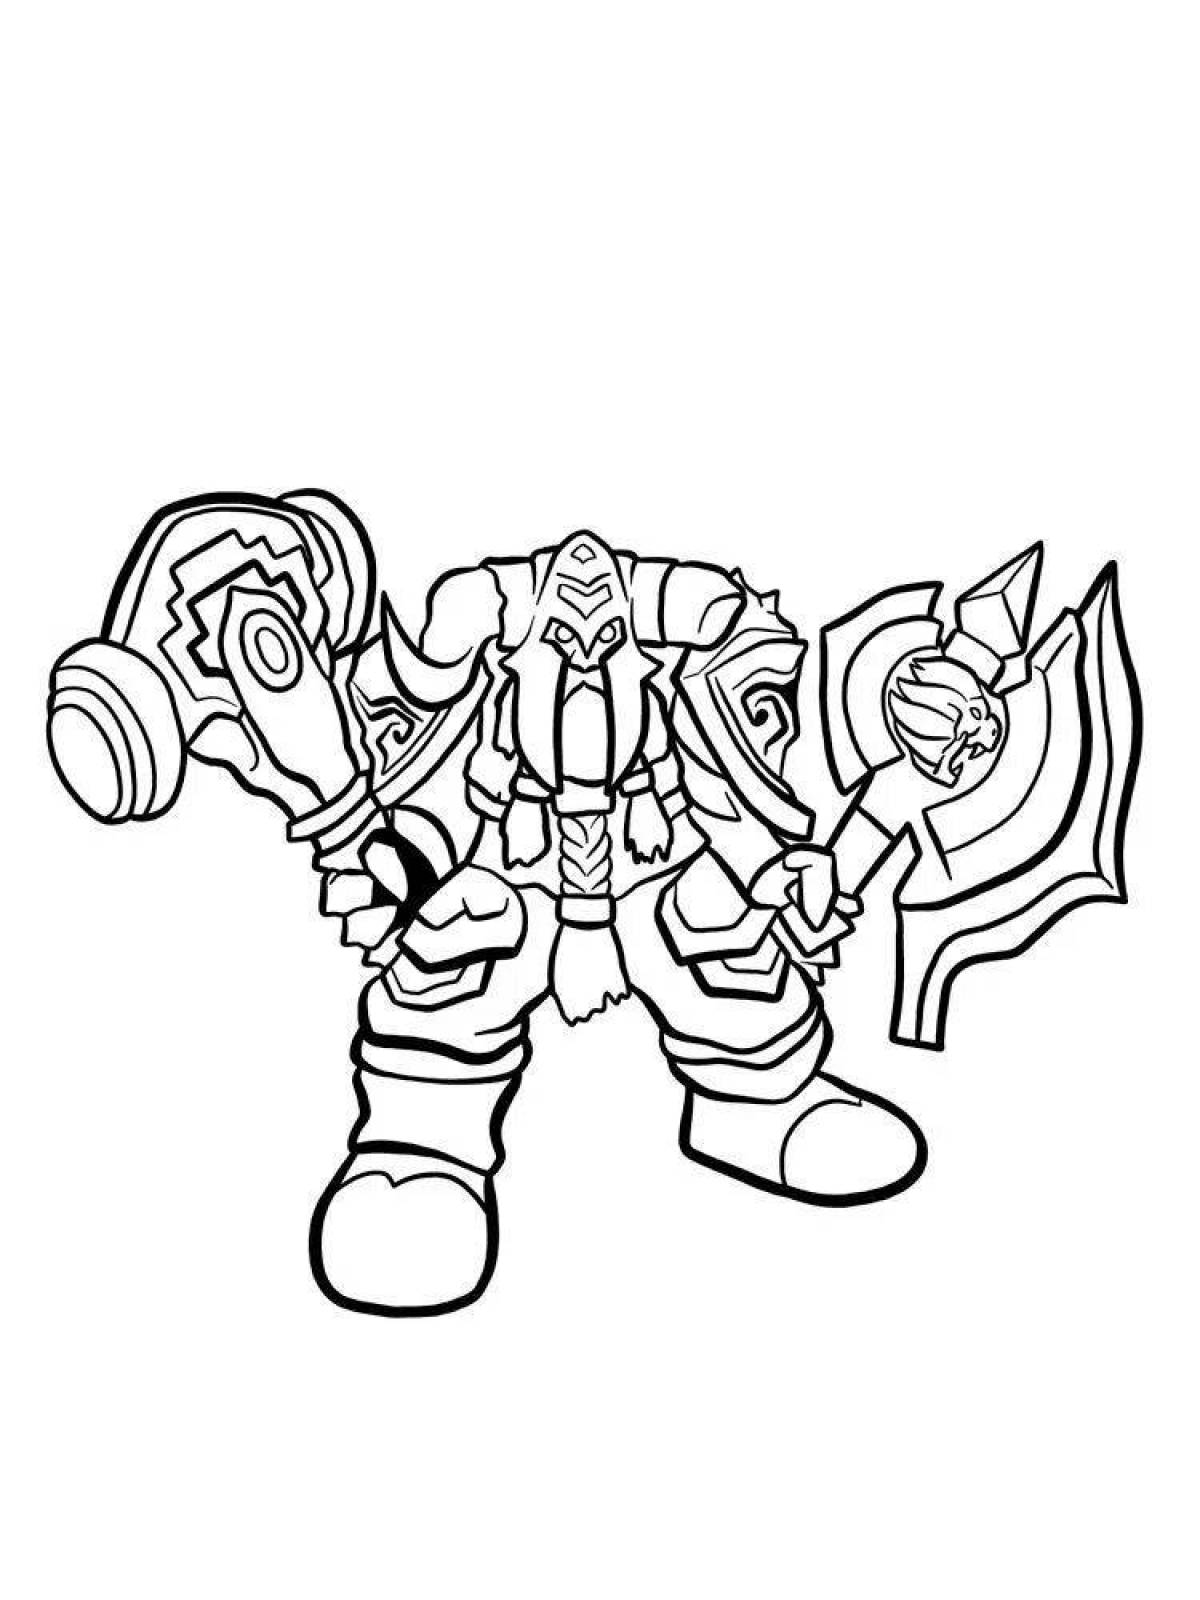 World of warcraft amazing coloring book